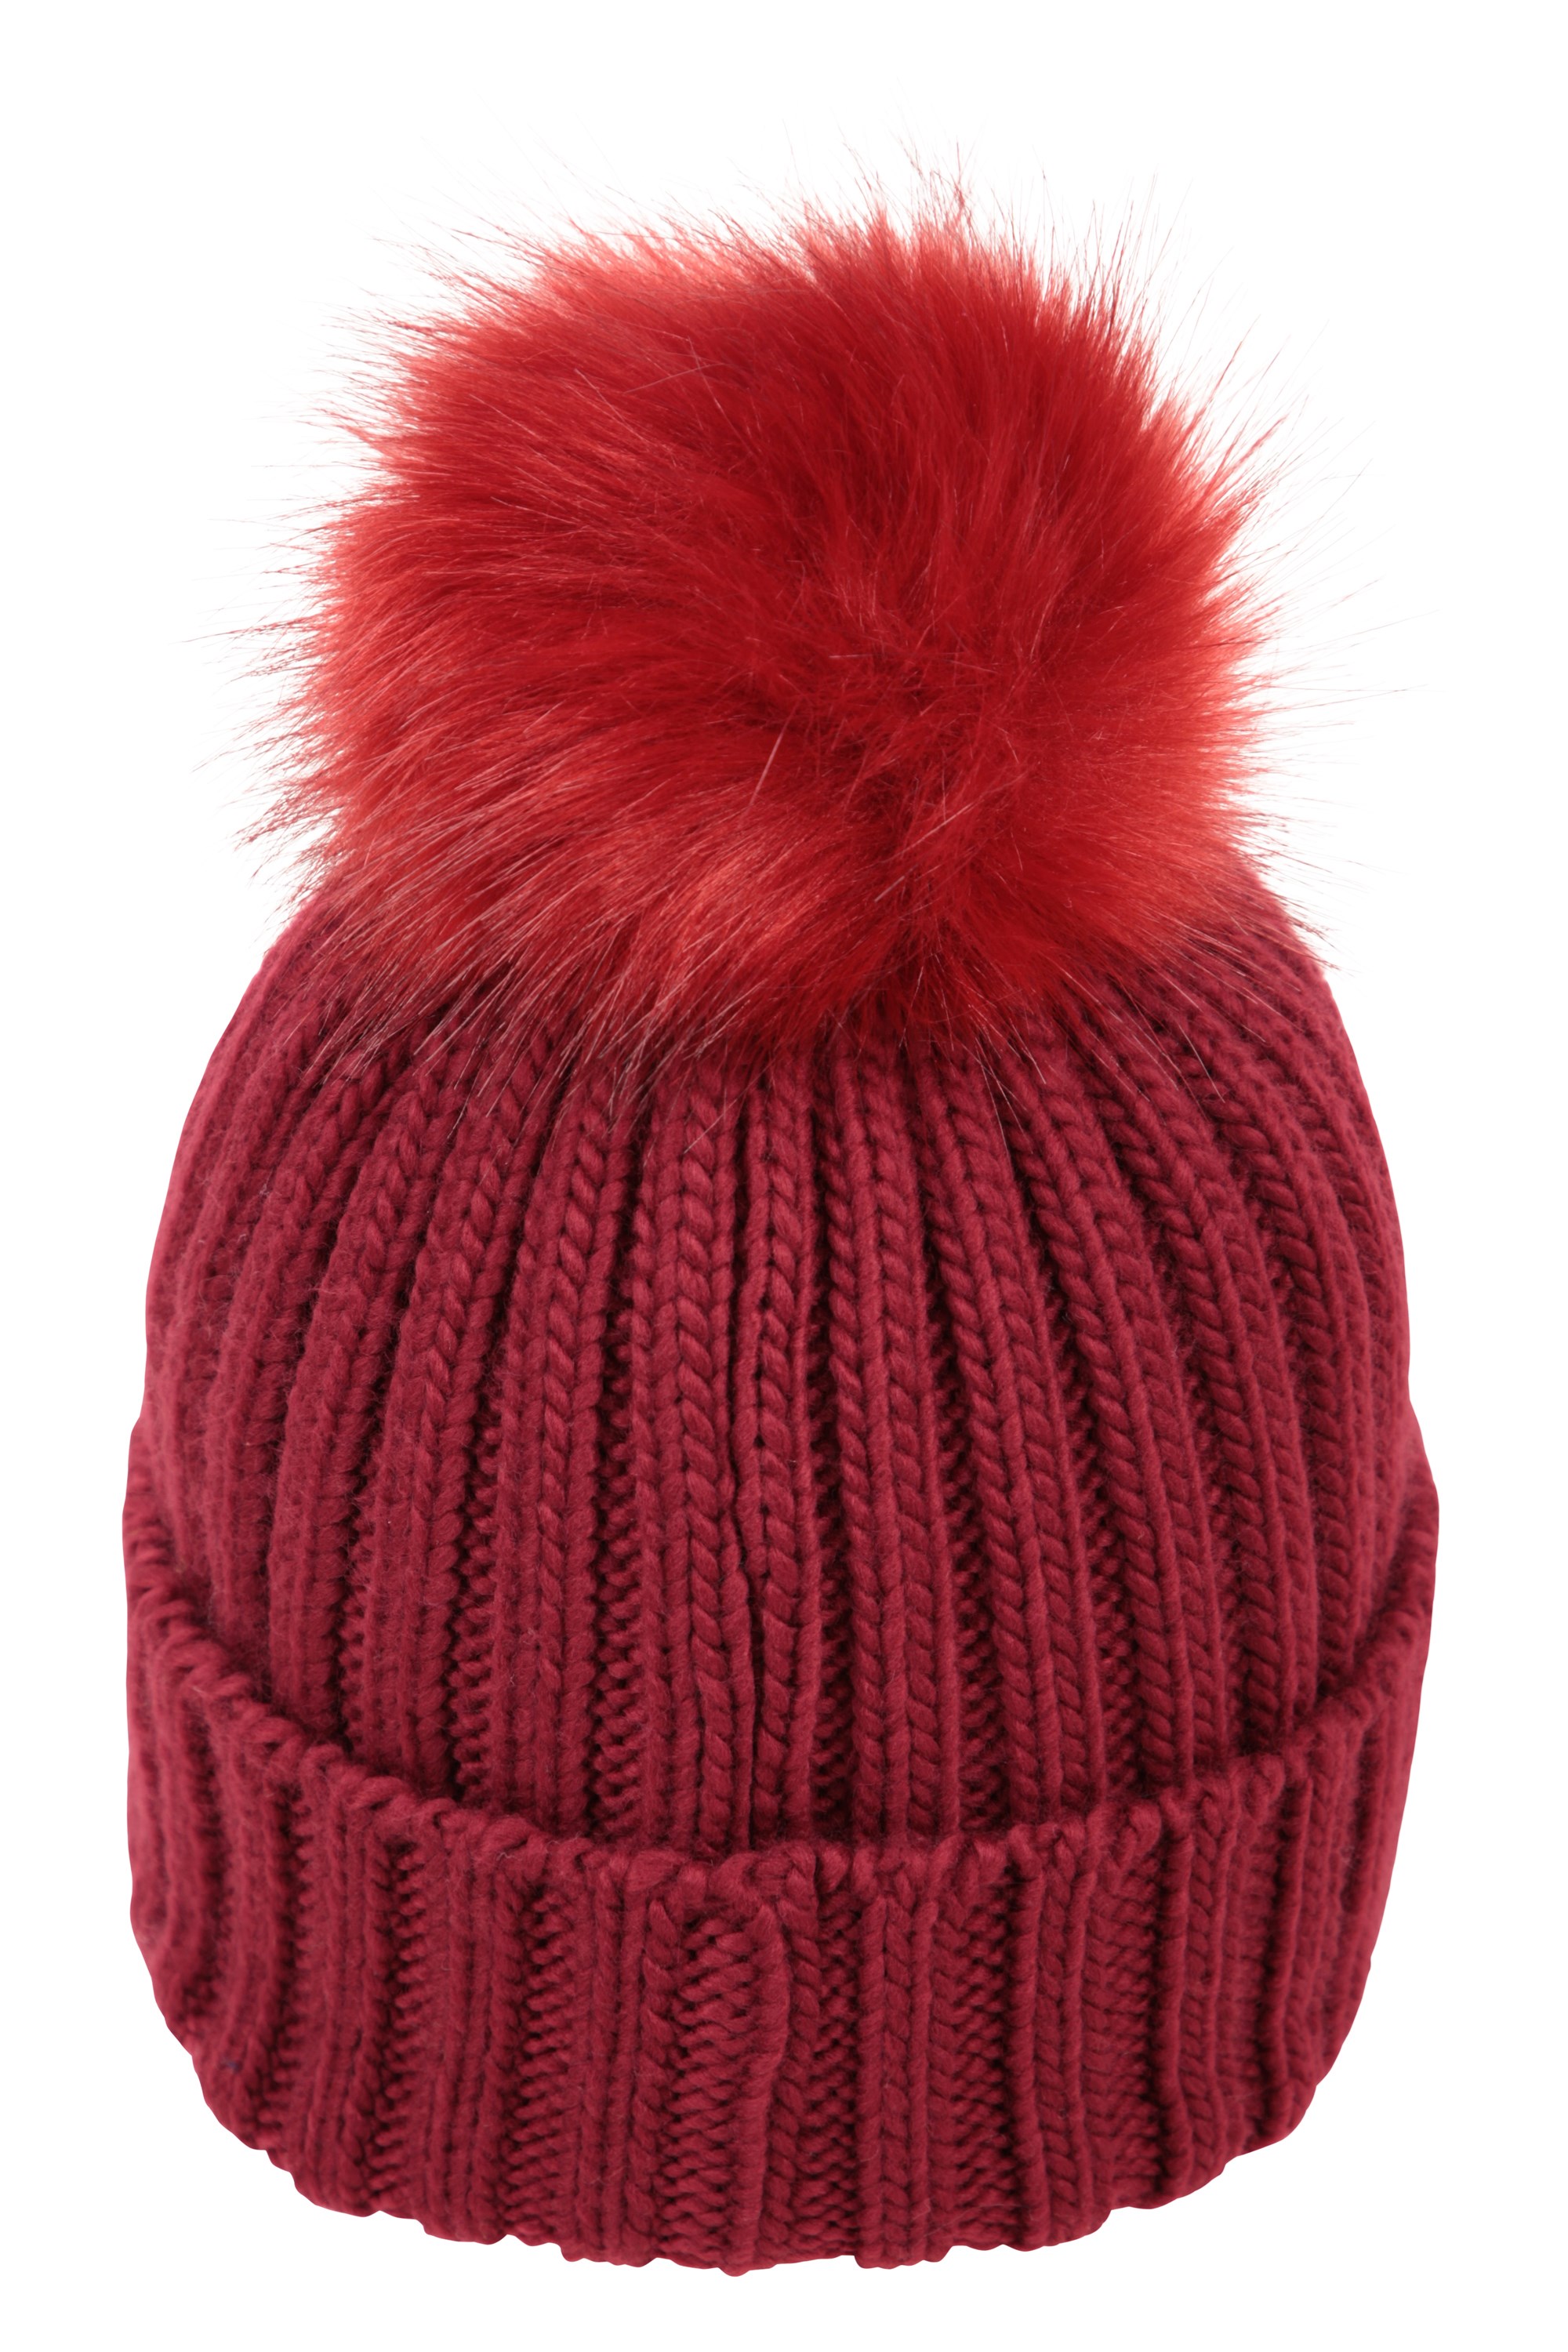 Mountain Warehouse Mountain Warehouse Lined Wooly Hat Women's 